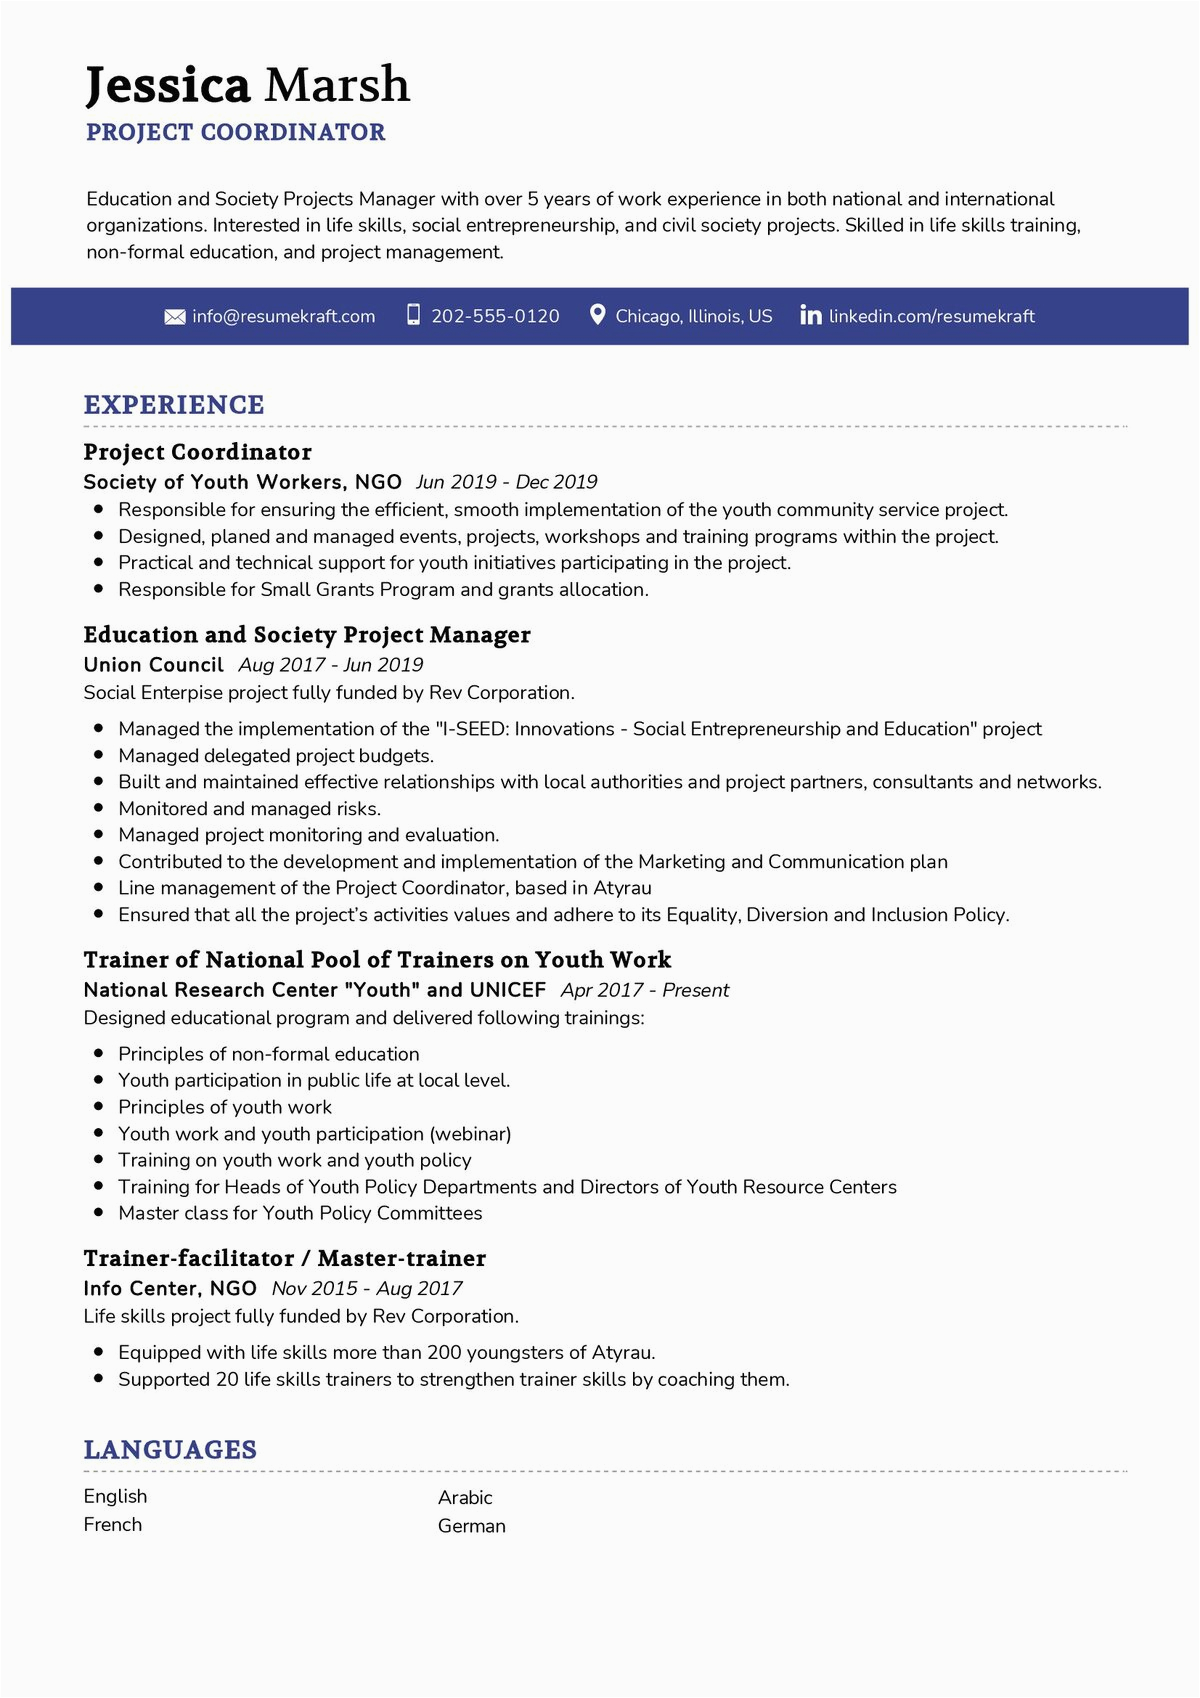 Resume Sample Copy for Project Coordinator for Usa Project Coordinator Resume Sample 2021